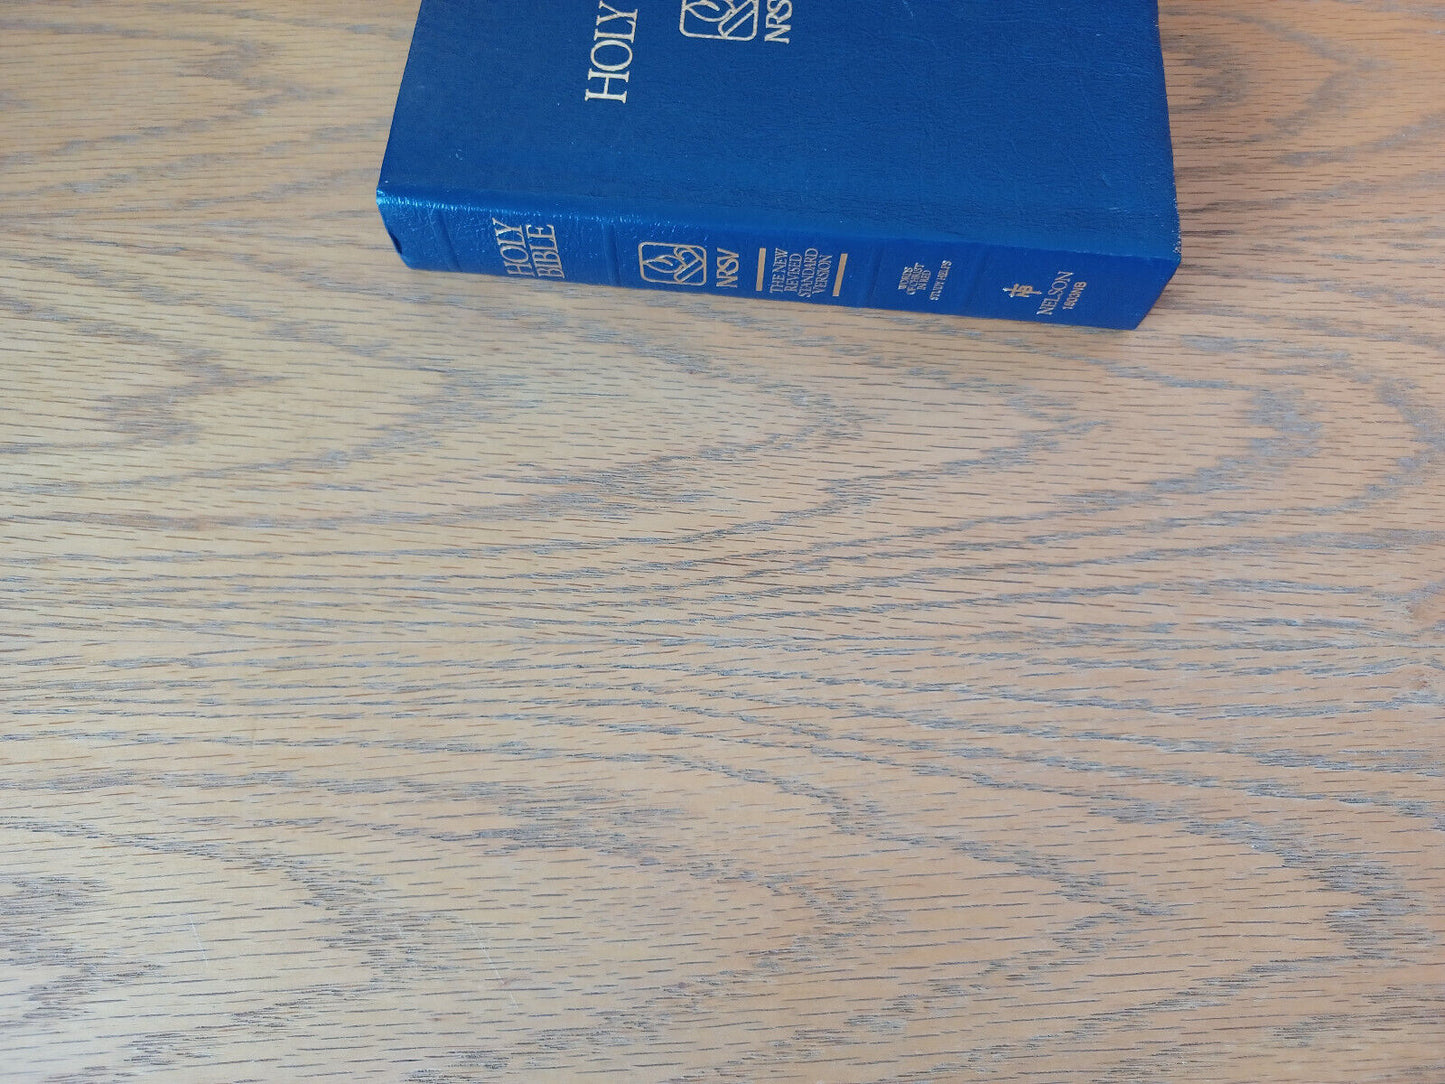 Holy Bible New Revised Standard Version 1990 Thomas Nelson 1803NB